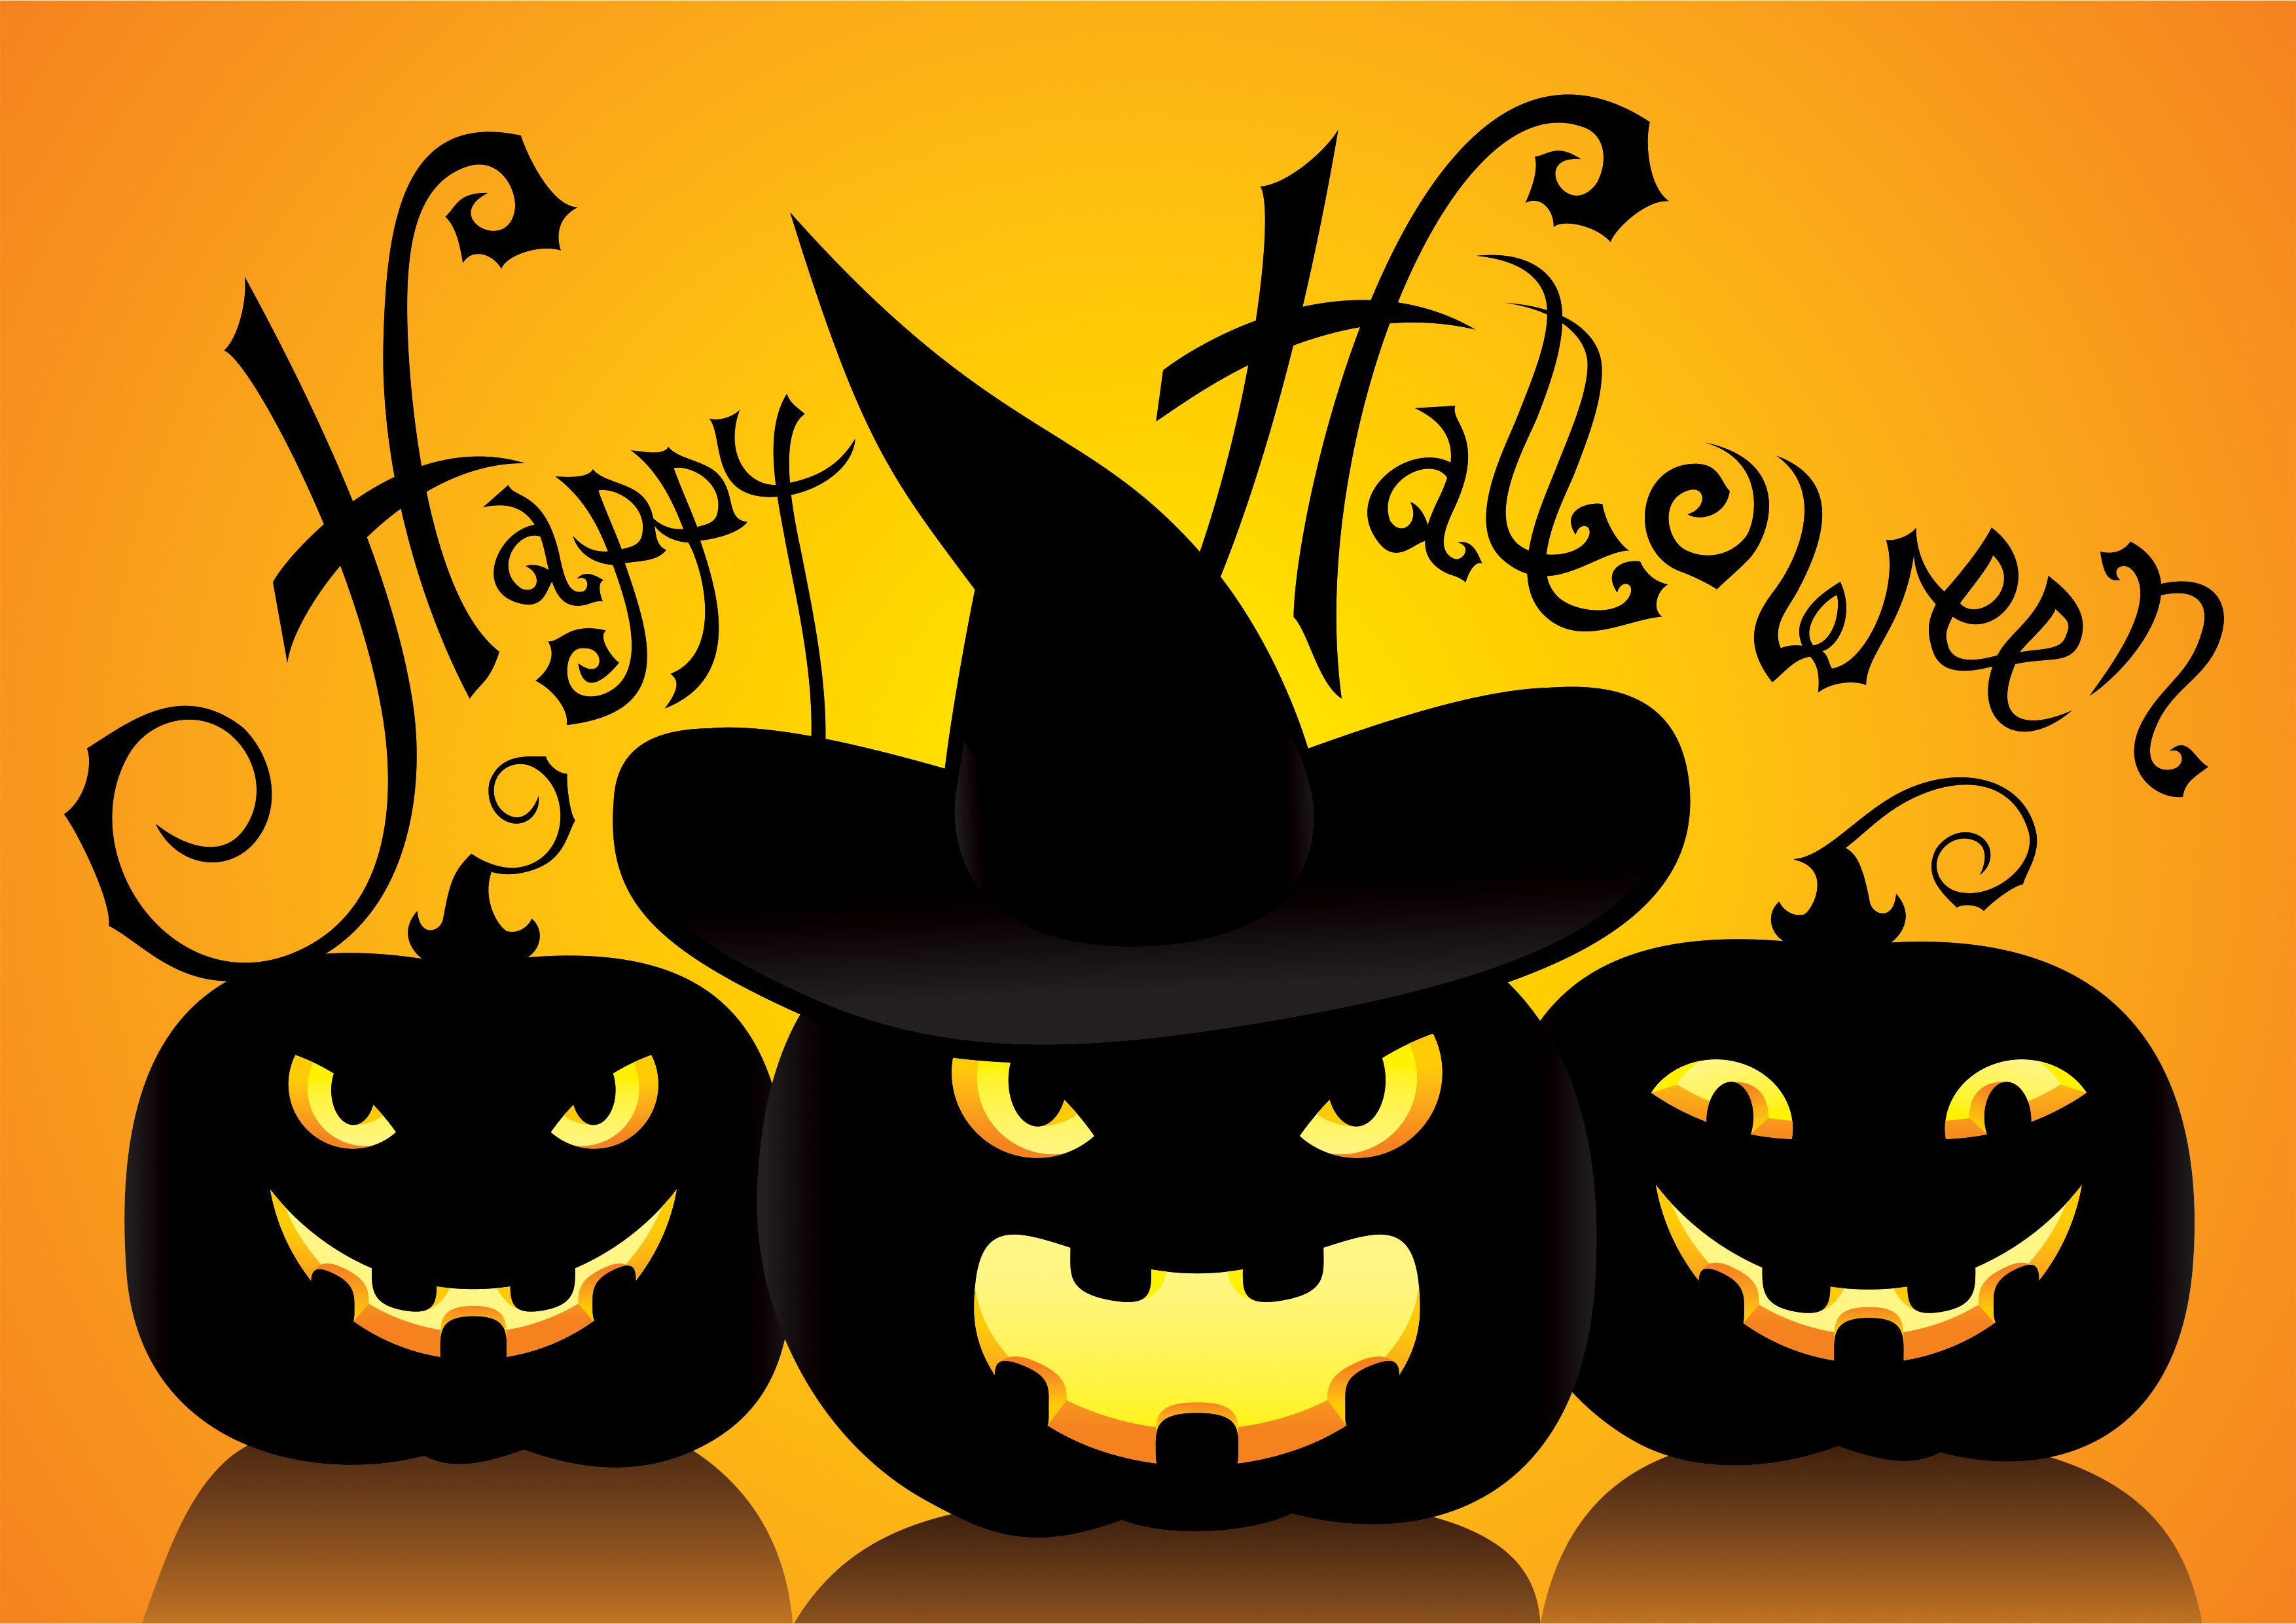 awesome Halloween wallpaper for your smartphone